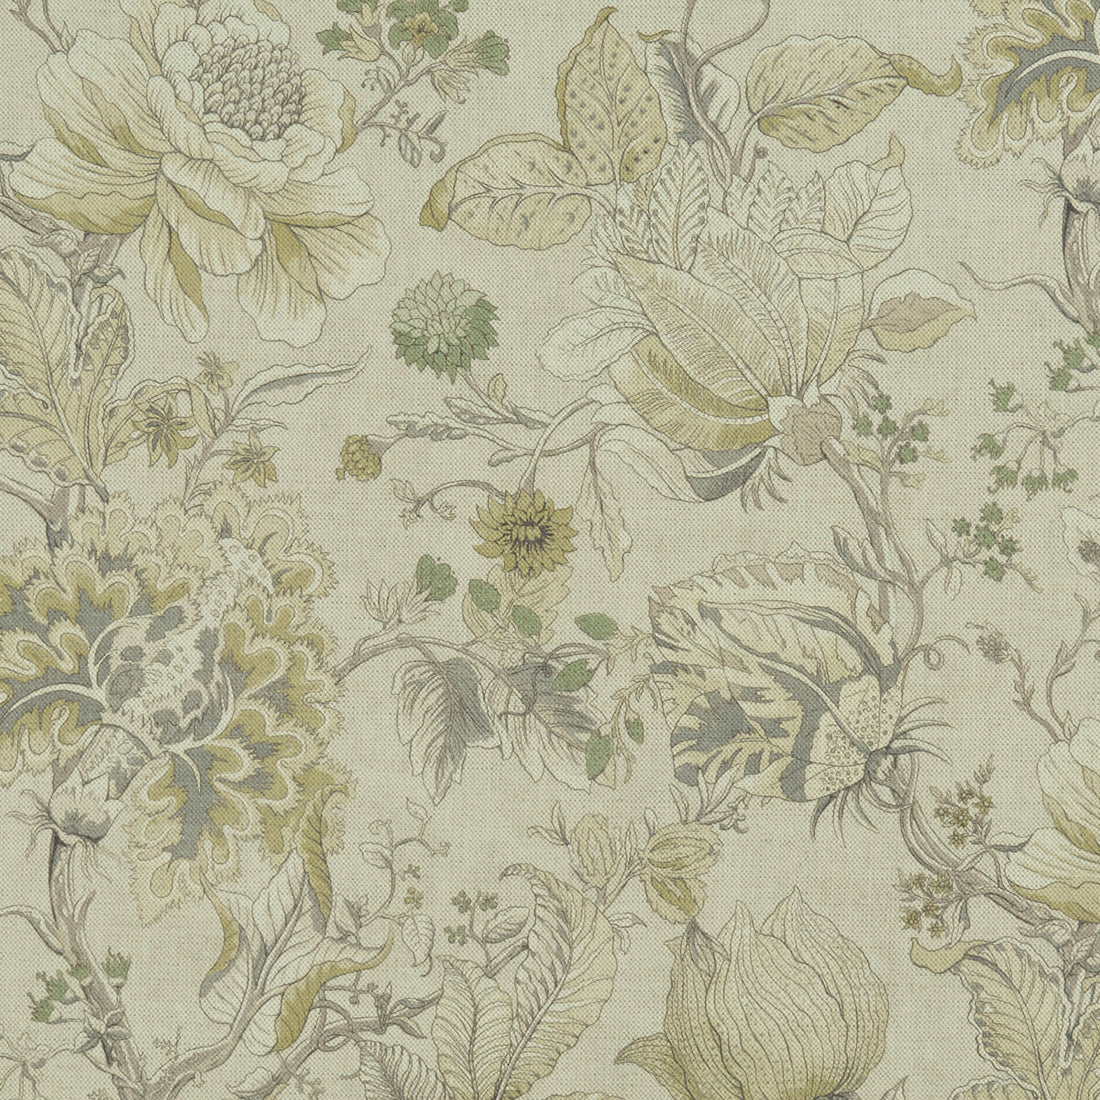 Sissinghurst fabric in citron/natural color - pattern F1048/02.CAC.0 - by Clarke And Clarke in the Clarke &amp; Clarke Castle Garden collection